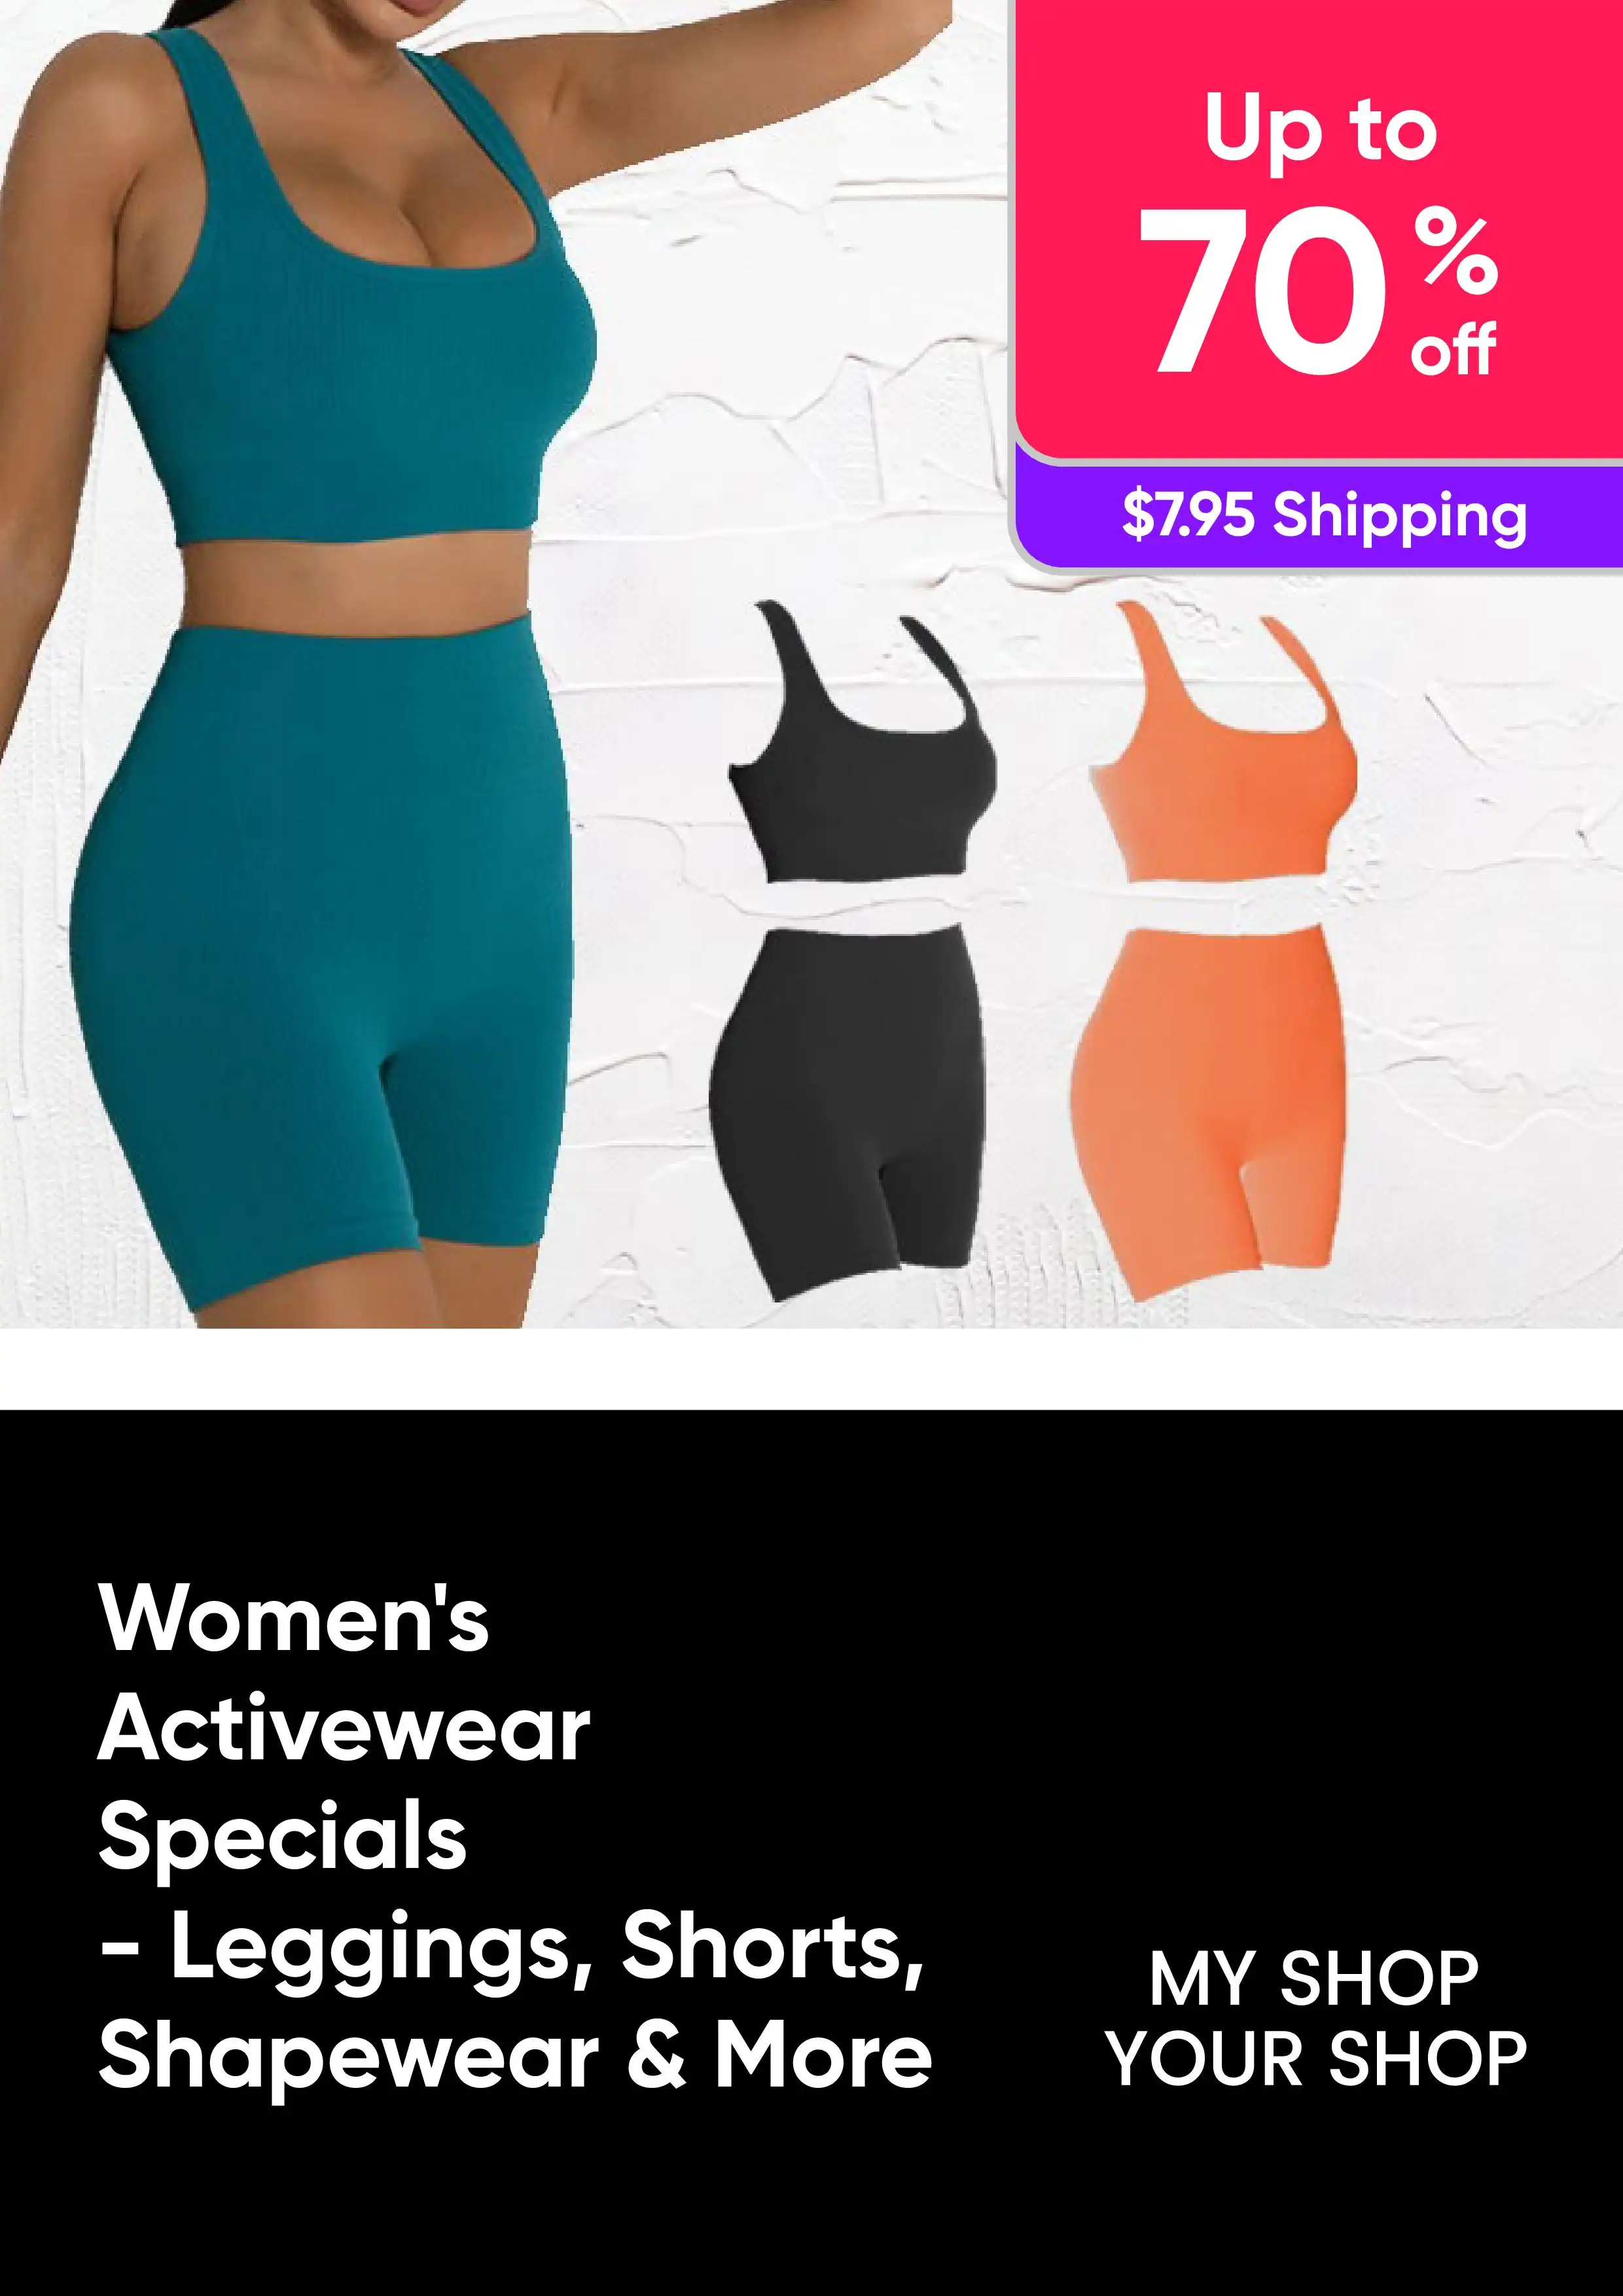 Women's Activewear Specials - Shop Leggings, Shorts, Shapewear and More - Save up to 70% Off